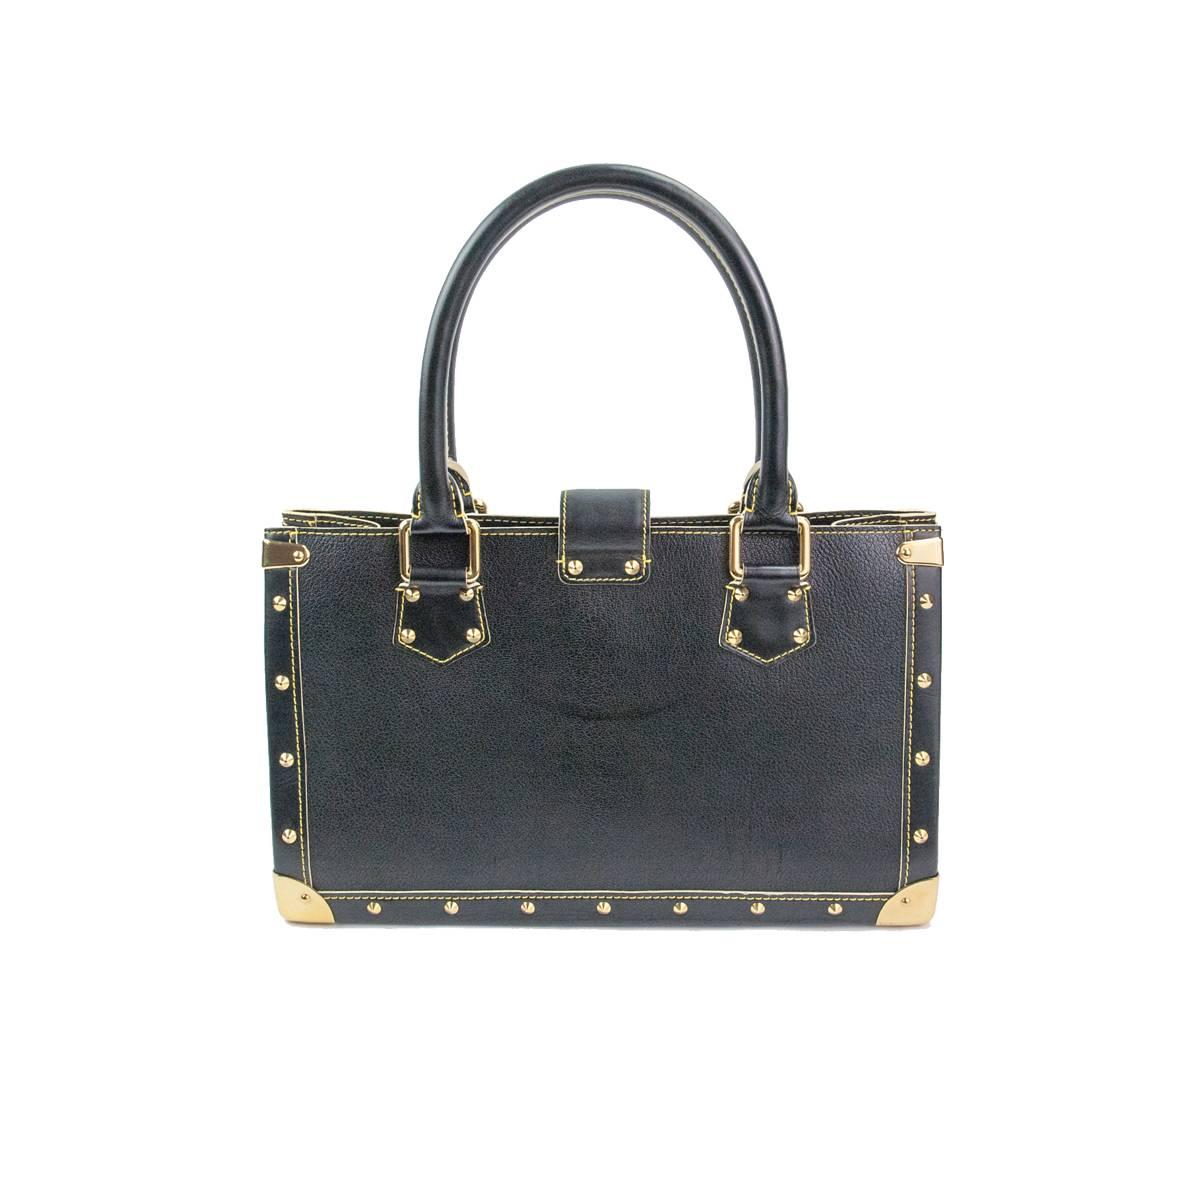 Fantastic 2003 Louis Vuitton Suhali Le Fabuleux bag
Letaher
Black color
Golden steel inserts and studs
Yellow colored stitching
External zip pocket
Double internal textile compartment divided by large zip pocket
Additional internal pocket and